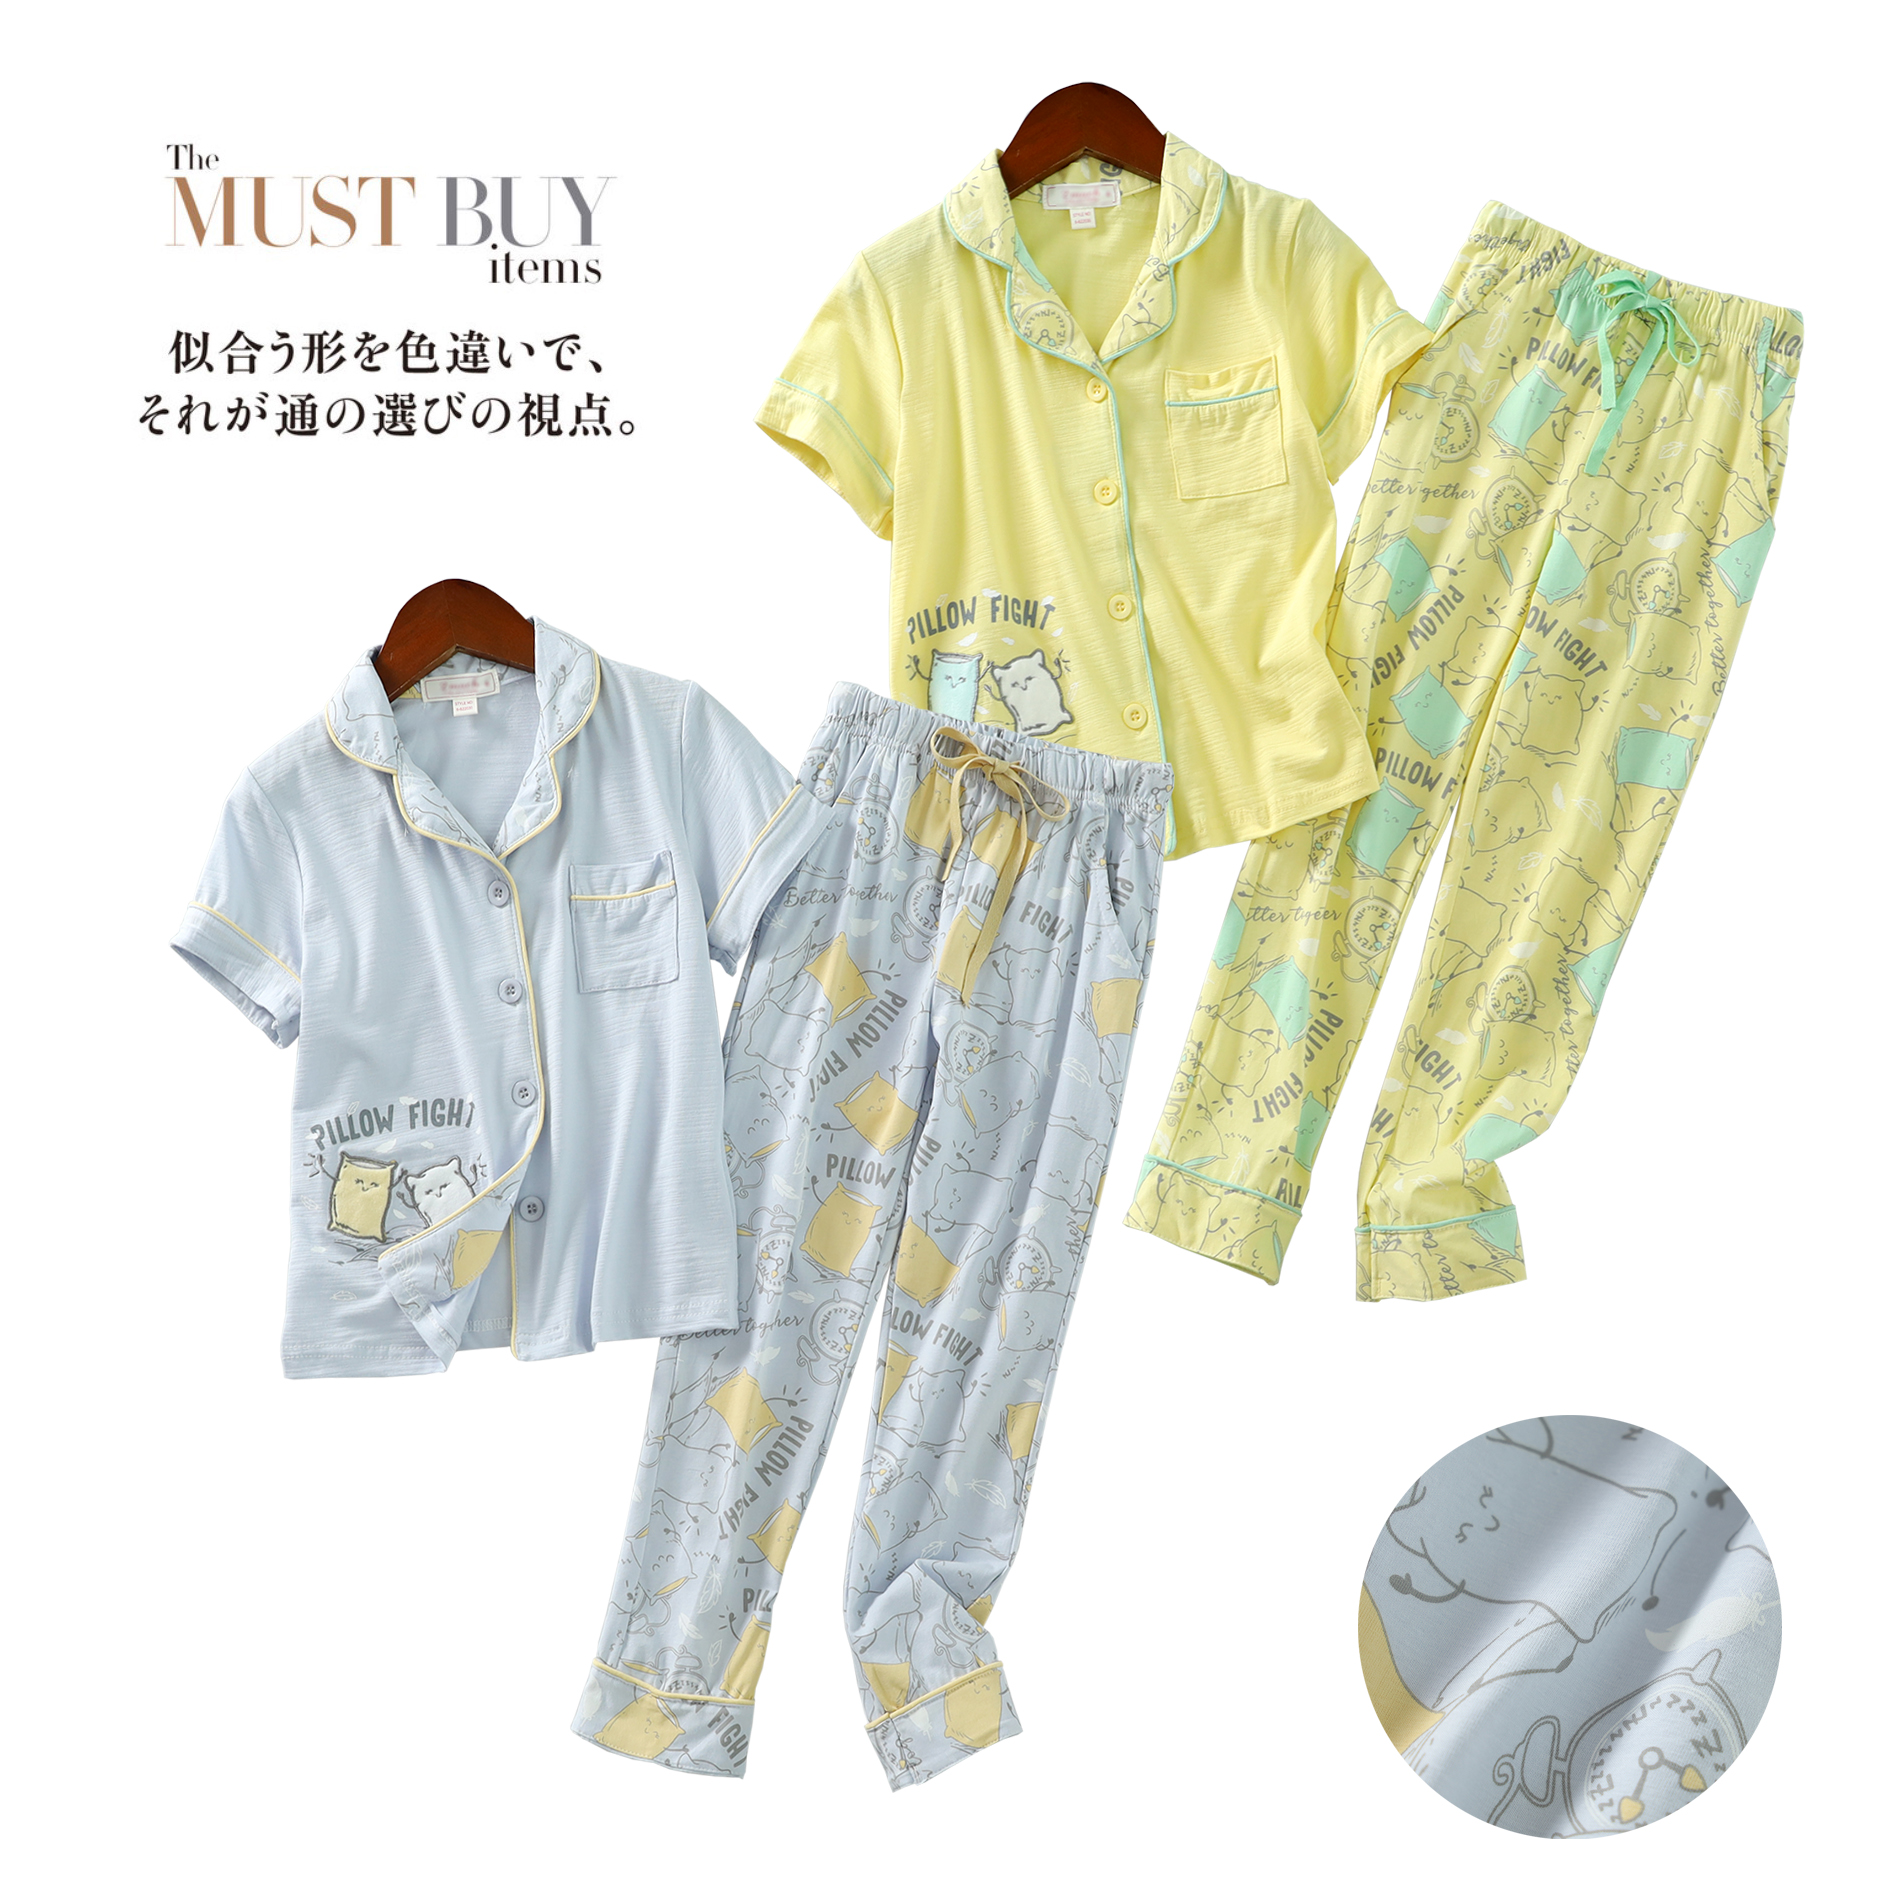 Sunshine Lodge Spring Summer New Children's Day Department Cute Comfort Short Sleeve Home Clothing Pajamas Sleeping Pants Suit